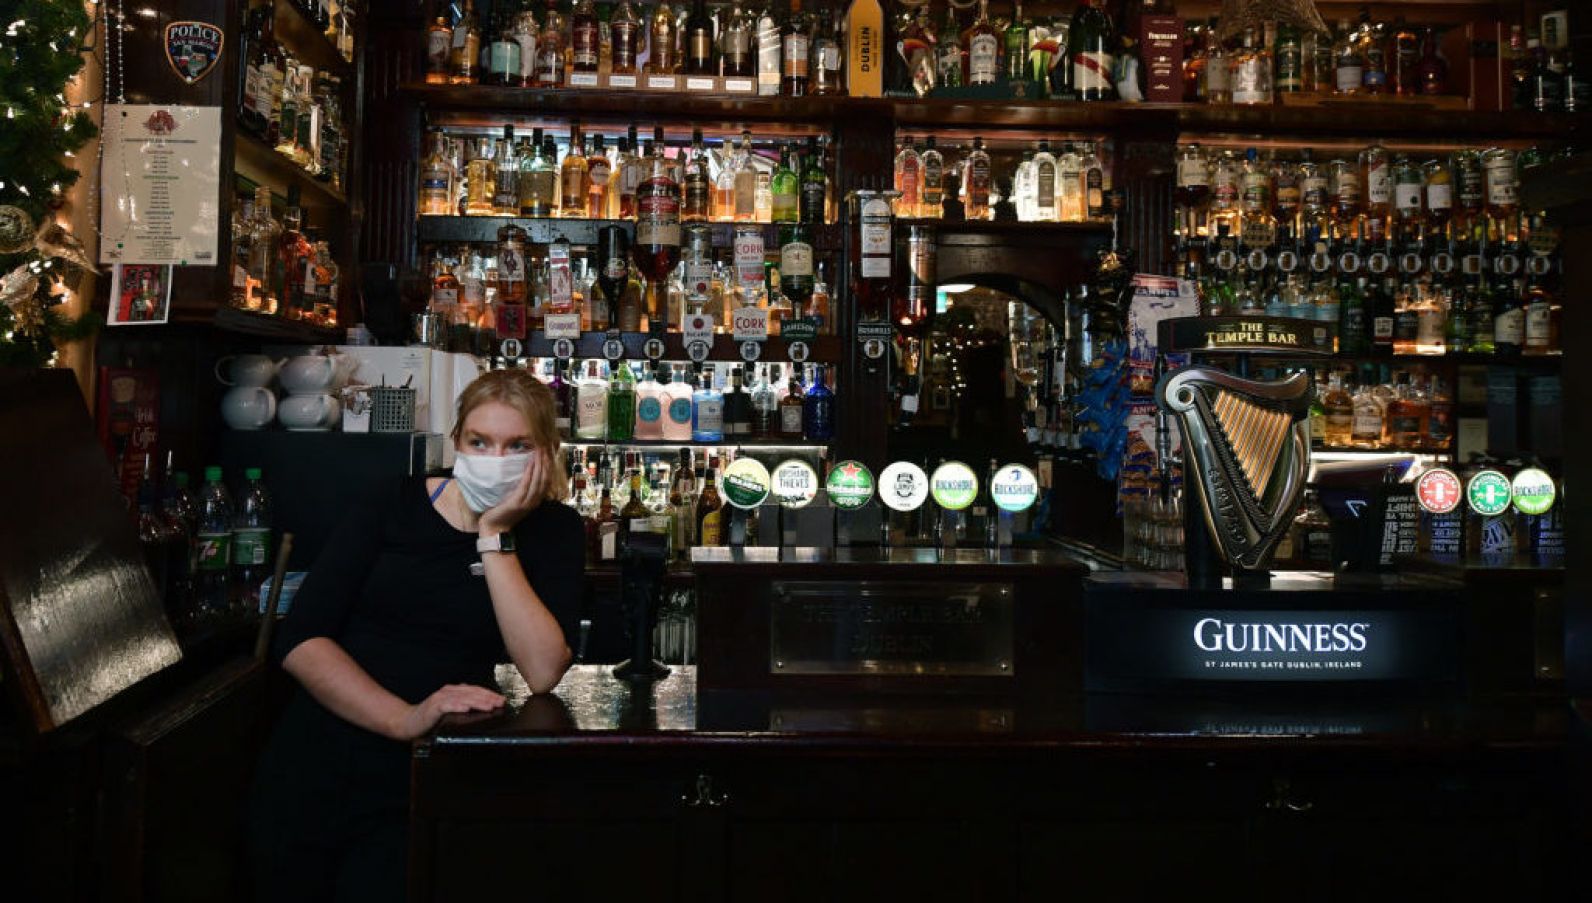 Temple Bar Staff Member Caoimhe Everard Looks Out The Window After Closing Early On December 20Th. The New Rules Require Hospitality Venues To Shut At 8Pm, In An Effort To Curb The Spread Of Covid And The Highly Contagious Omicron Variant. Photo: Charles Mcquillan/Getty